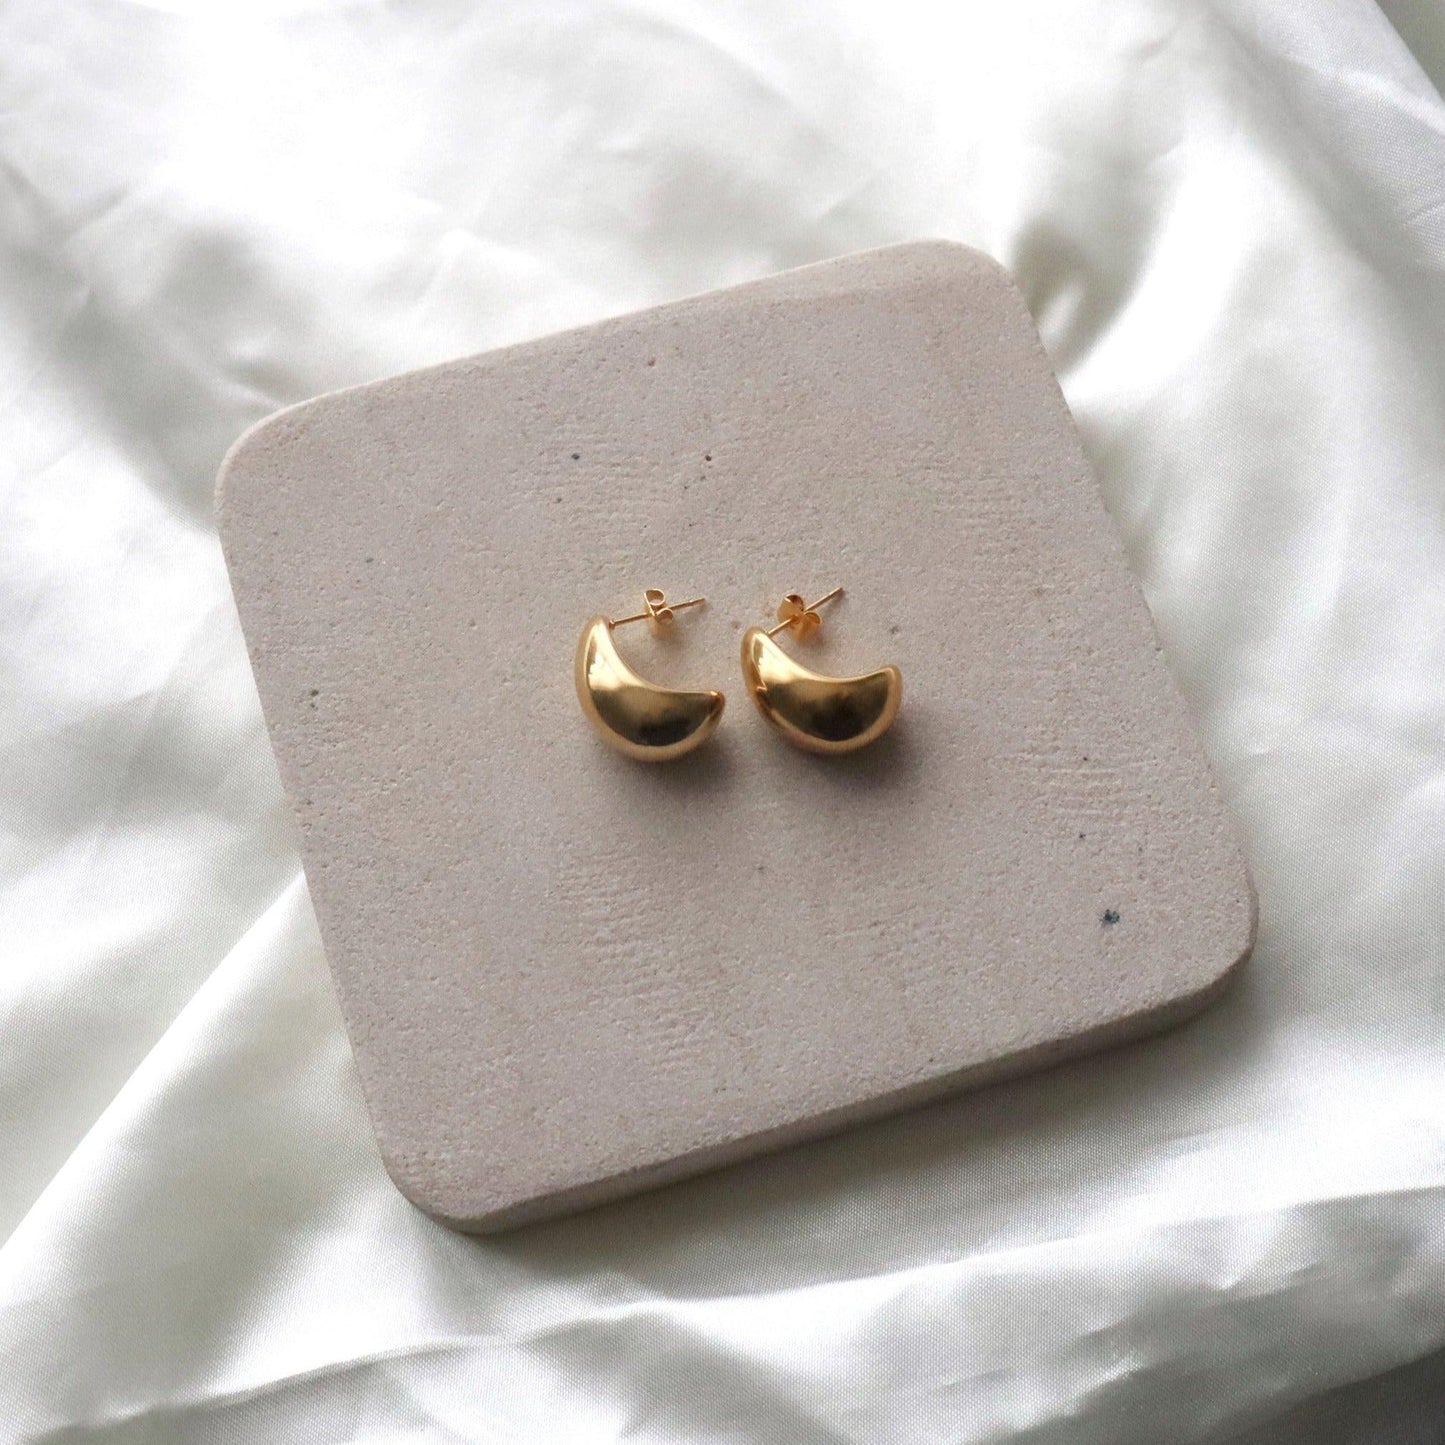 Crescent Earrings - JESSA JEWELRY | GOLD JEWELRY; dainty, affordable gold everyday jewelry. Tarnish free, water-resistant, hypoallergenic. Jewelry for everyday wear